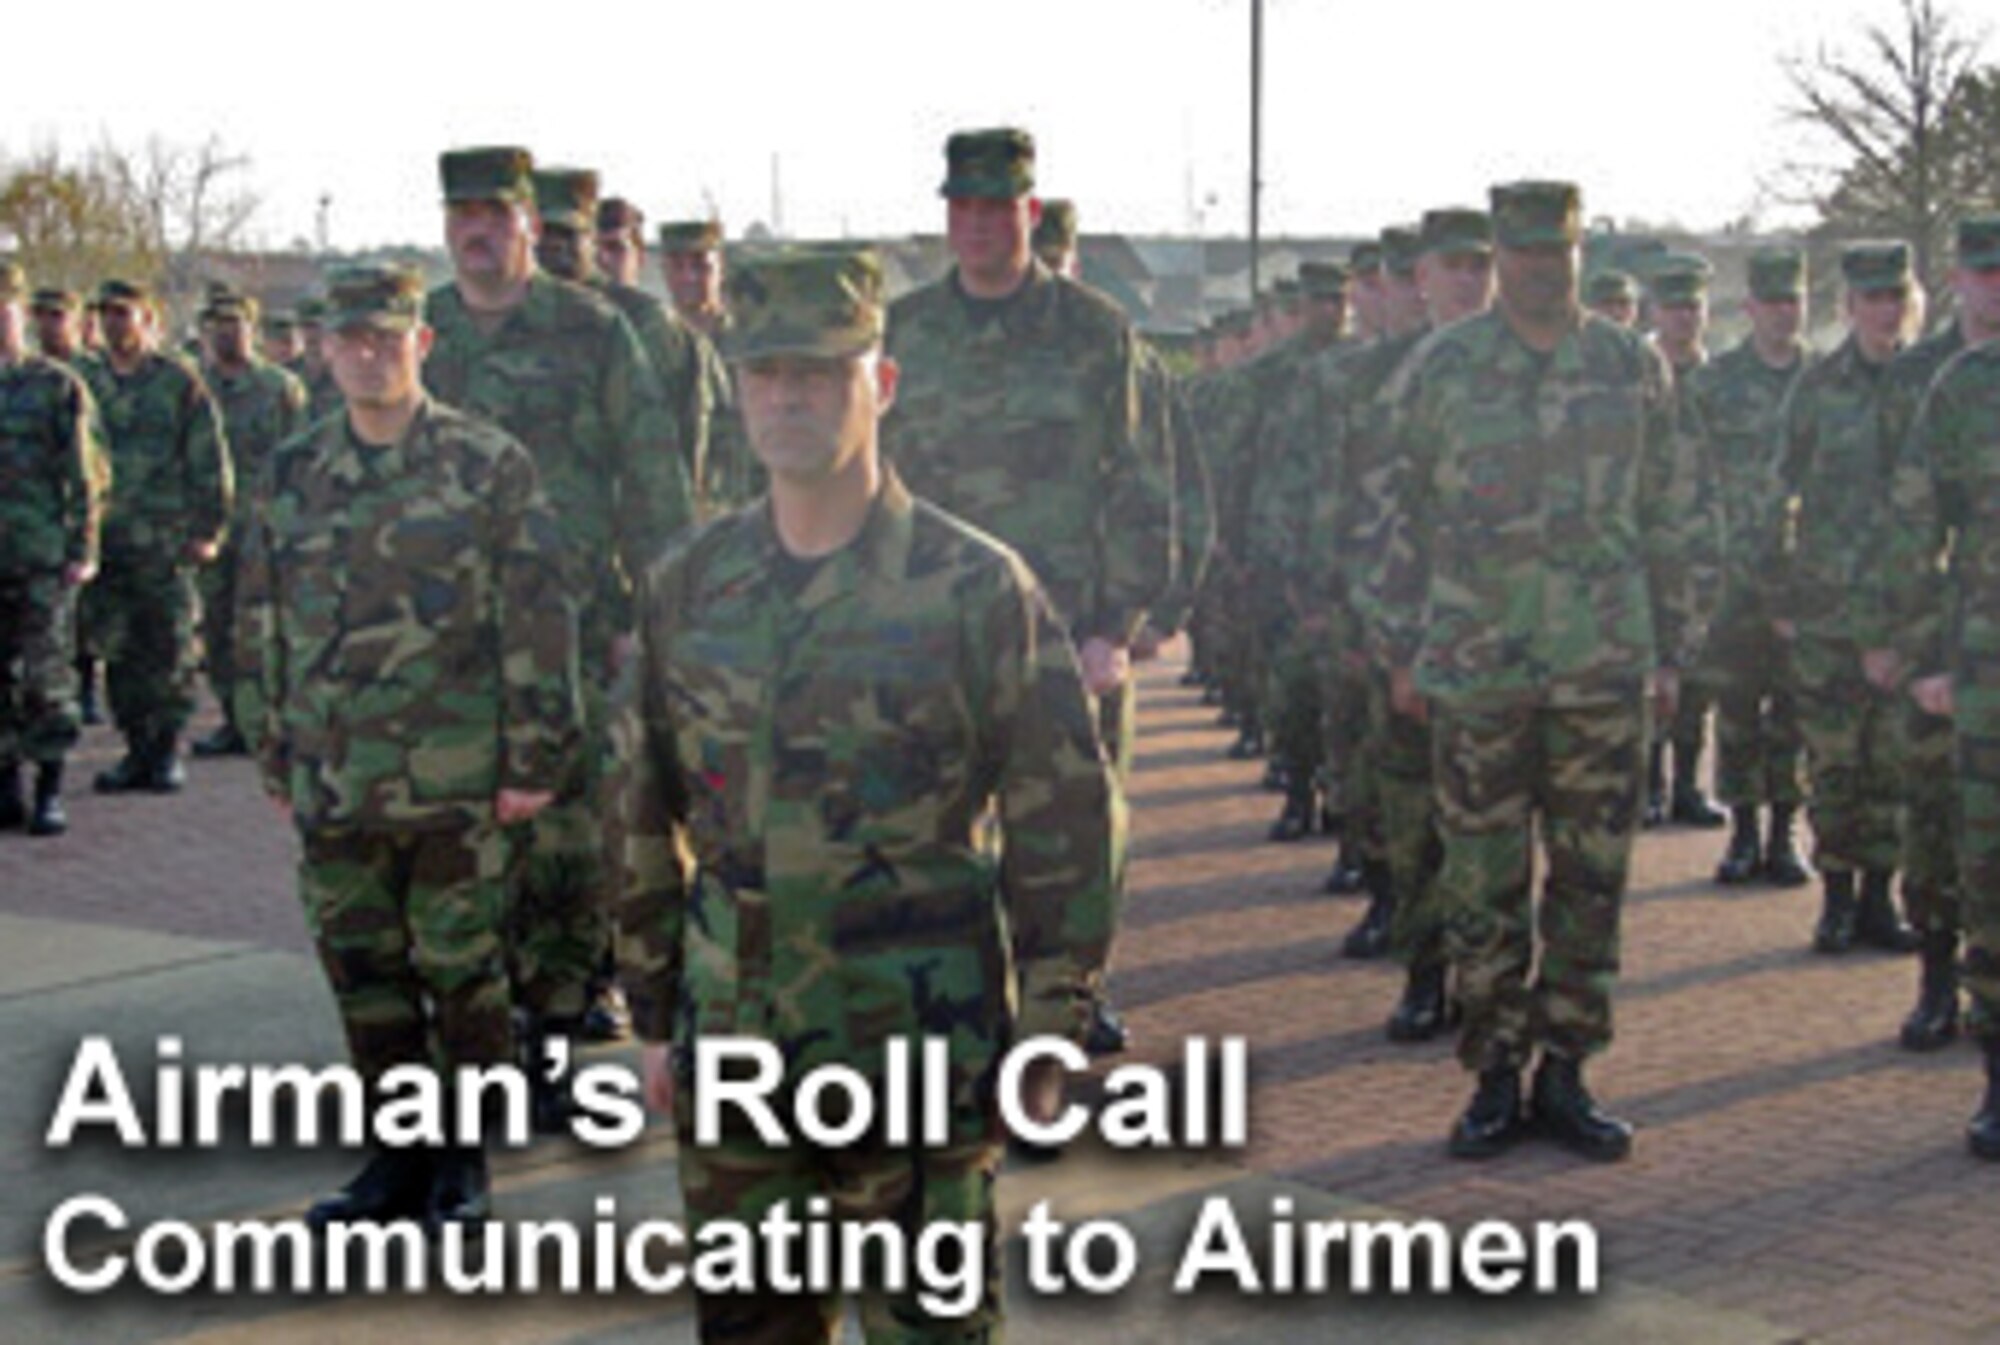 The newest Airman's Roll Call focuses on Chief of Staff of the Air Force contacting Airmen directly. (U.S. Air Force illustration/Mike Carabajal)